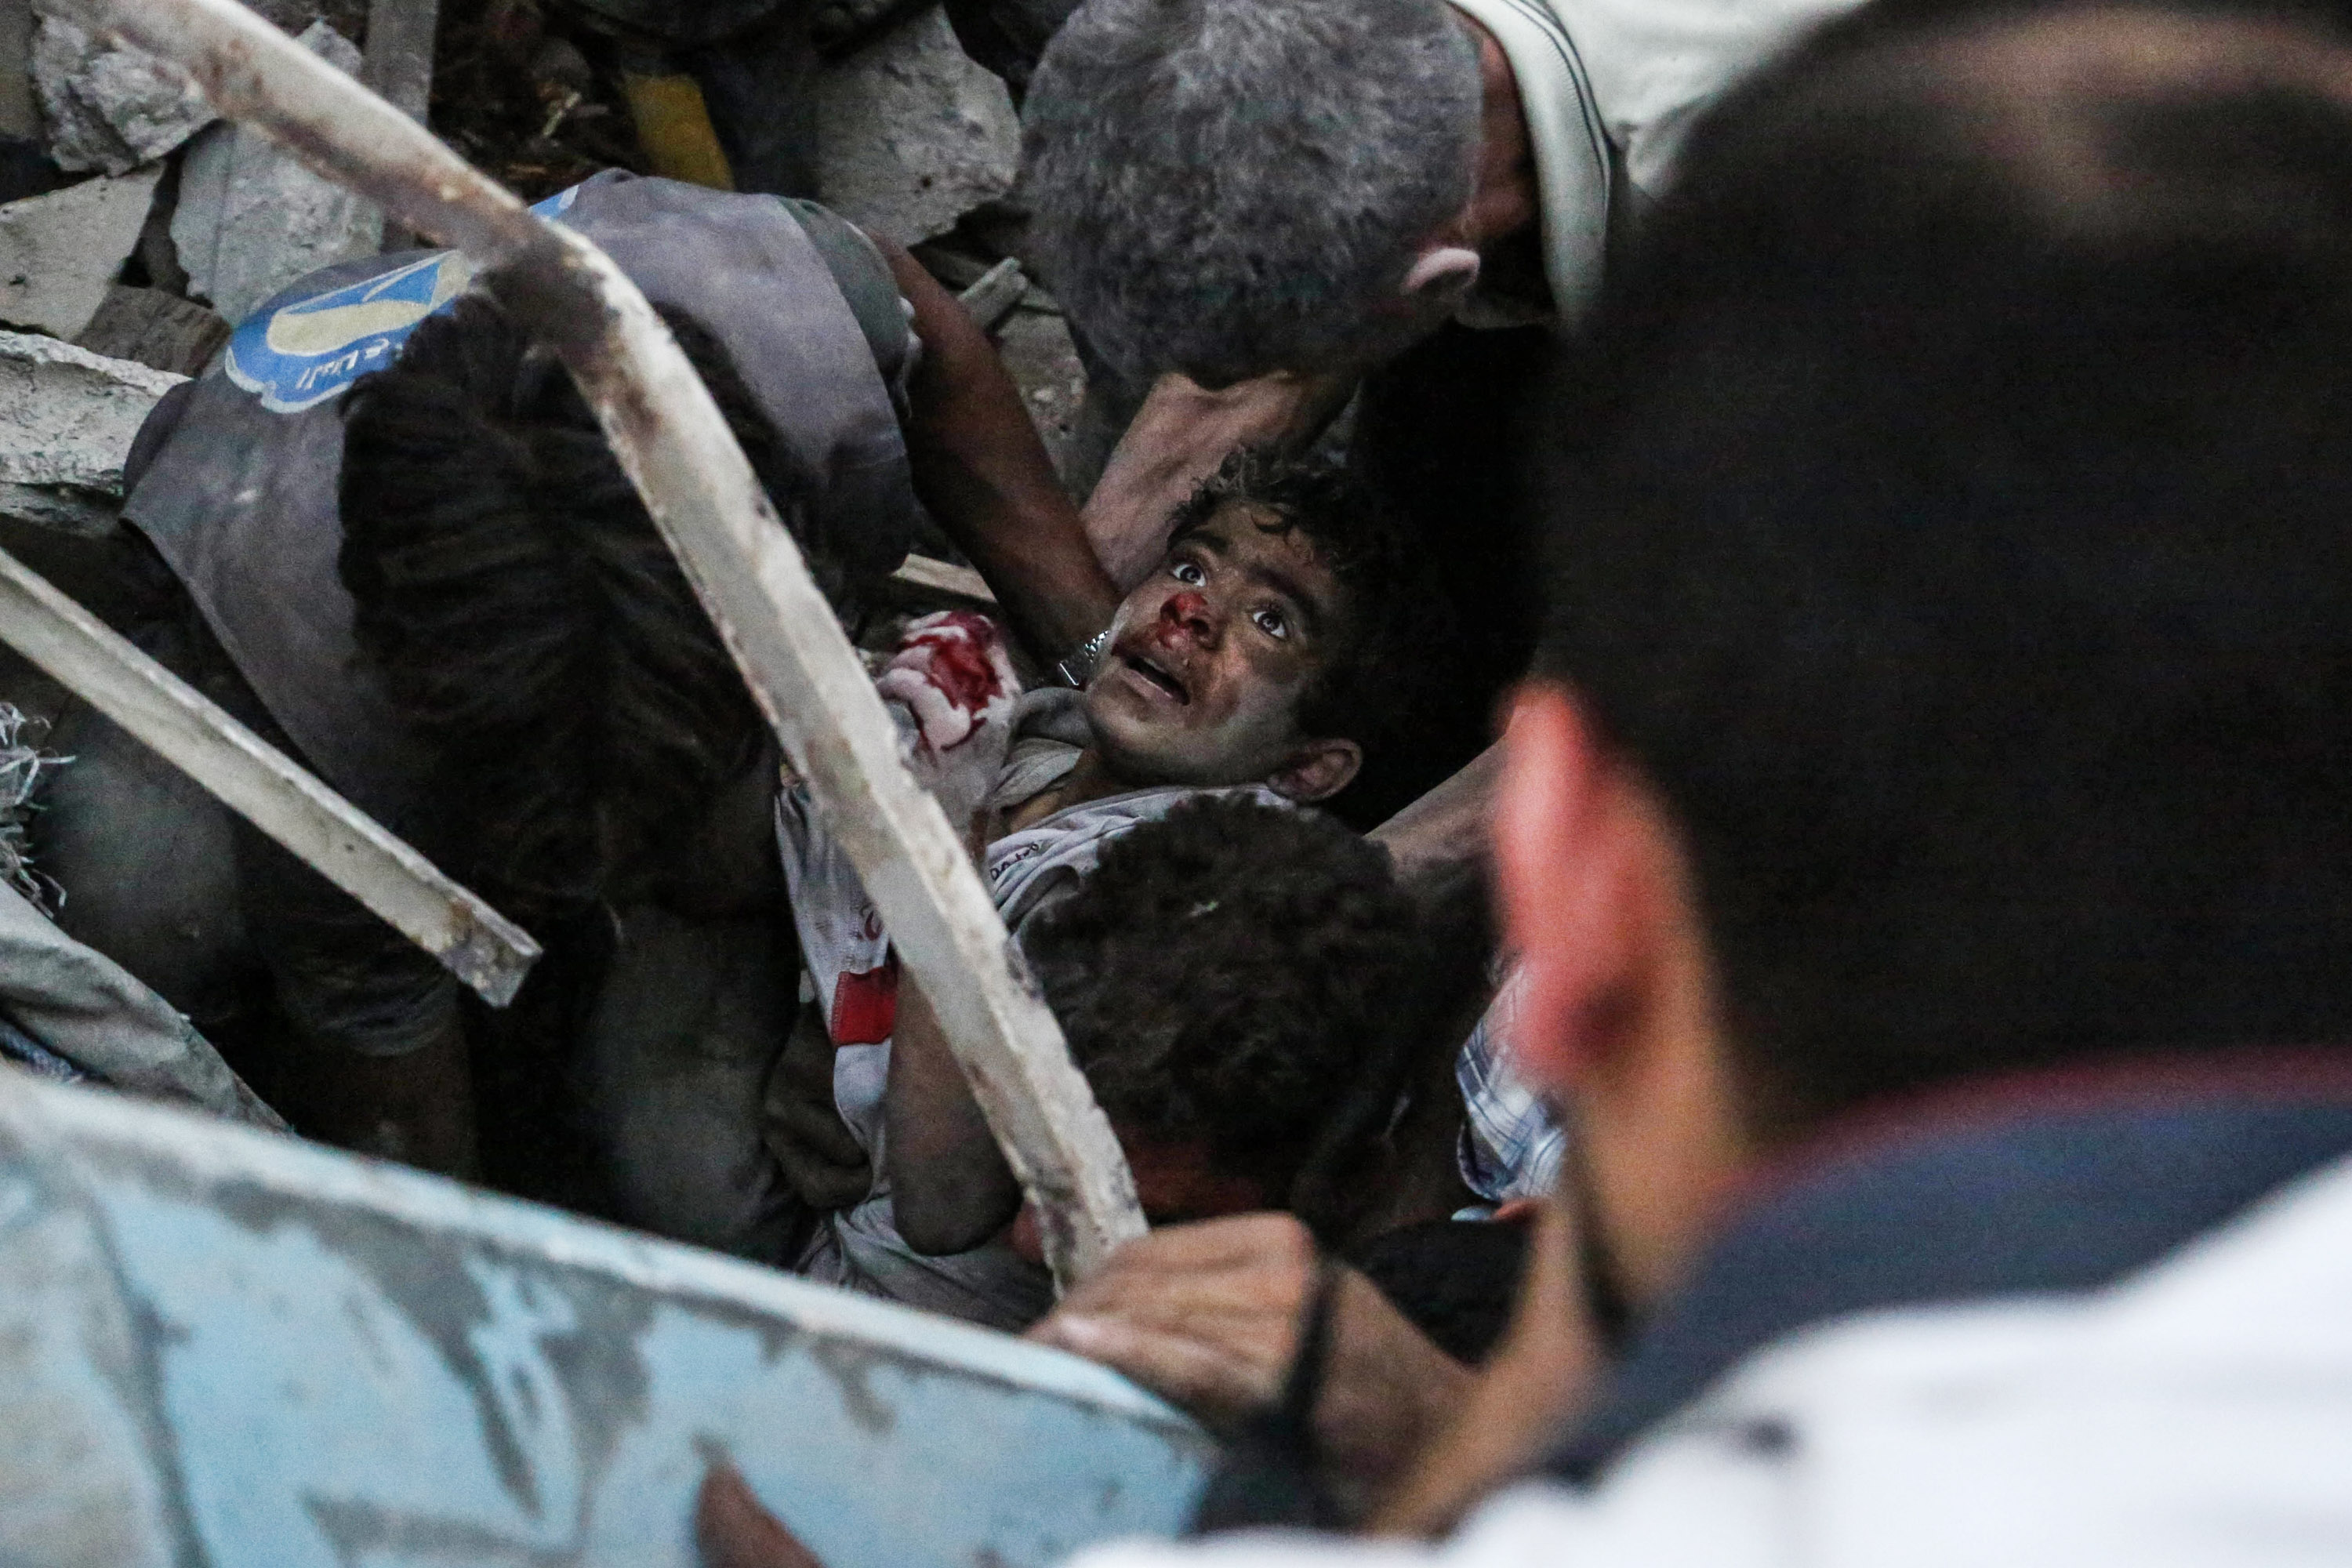 Syrians evacuate an injured boy from rubble following a reported air strike on a rebel-held town of Douma, northeast of the capital Damascus on June 16, 2015.
Nearly every day, Syria's air force drops barrel bombs -- containers packed with crude explosives and shrapnel -- on areas wrested from government control by rebels.  / AFP PHOTO / SAMEER AL-DOUMY